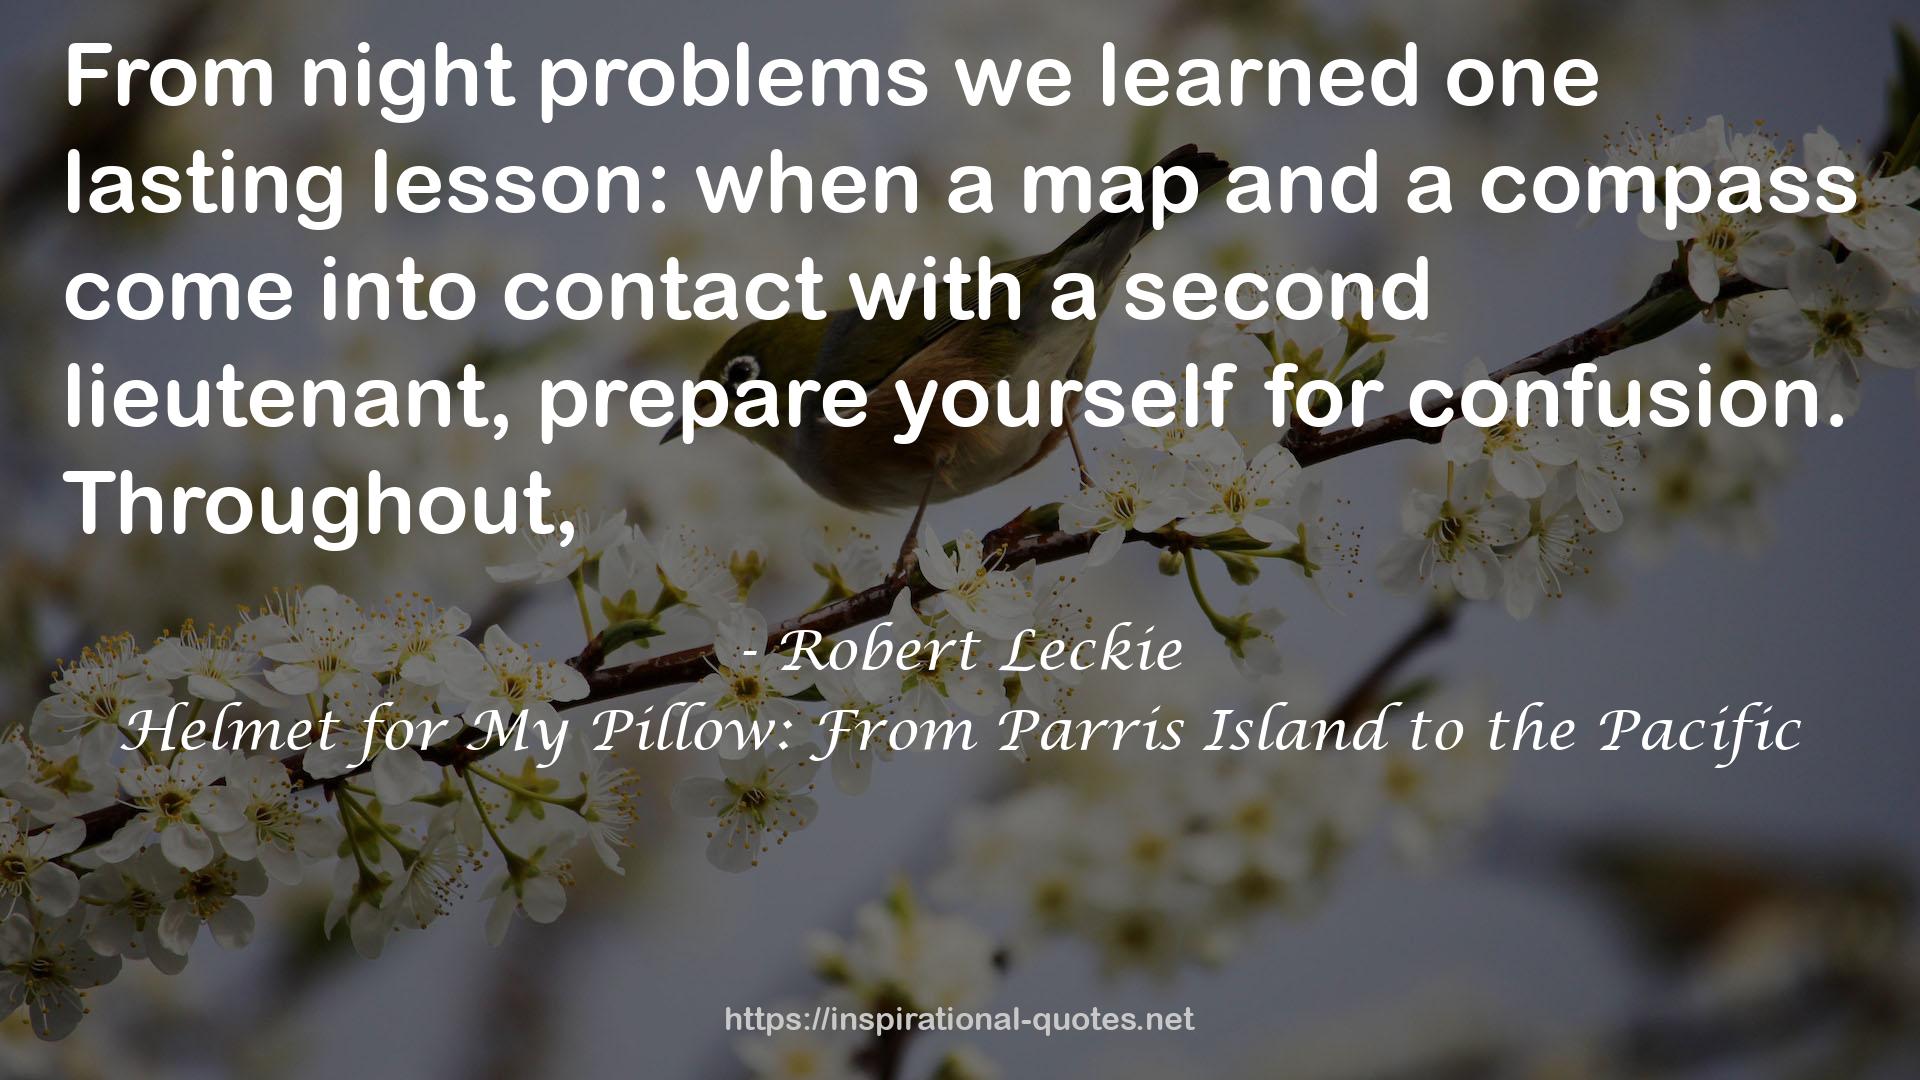 Robert Leckie QUOTES